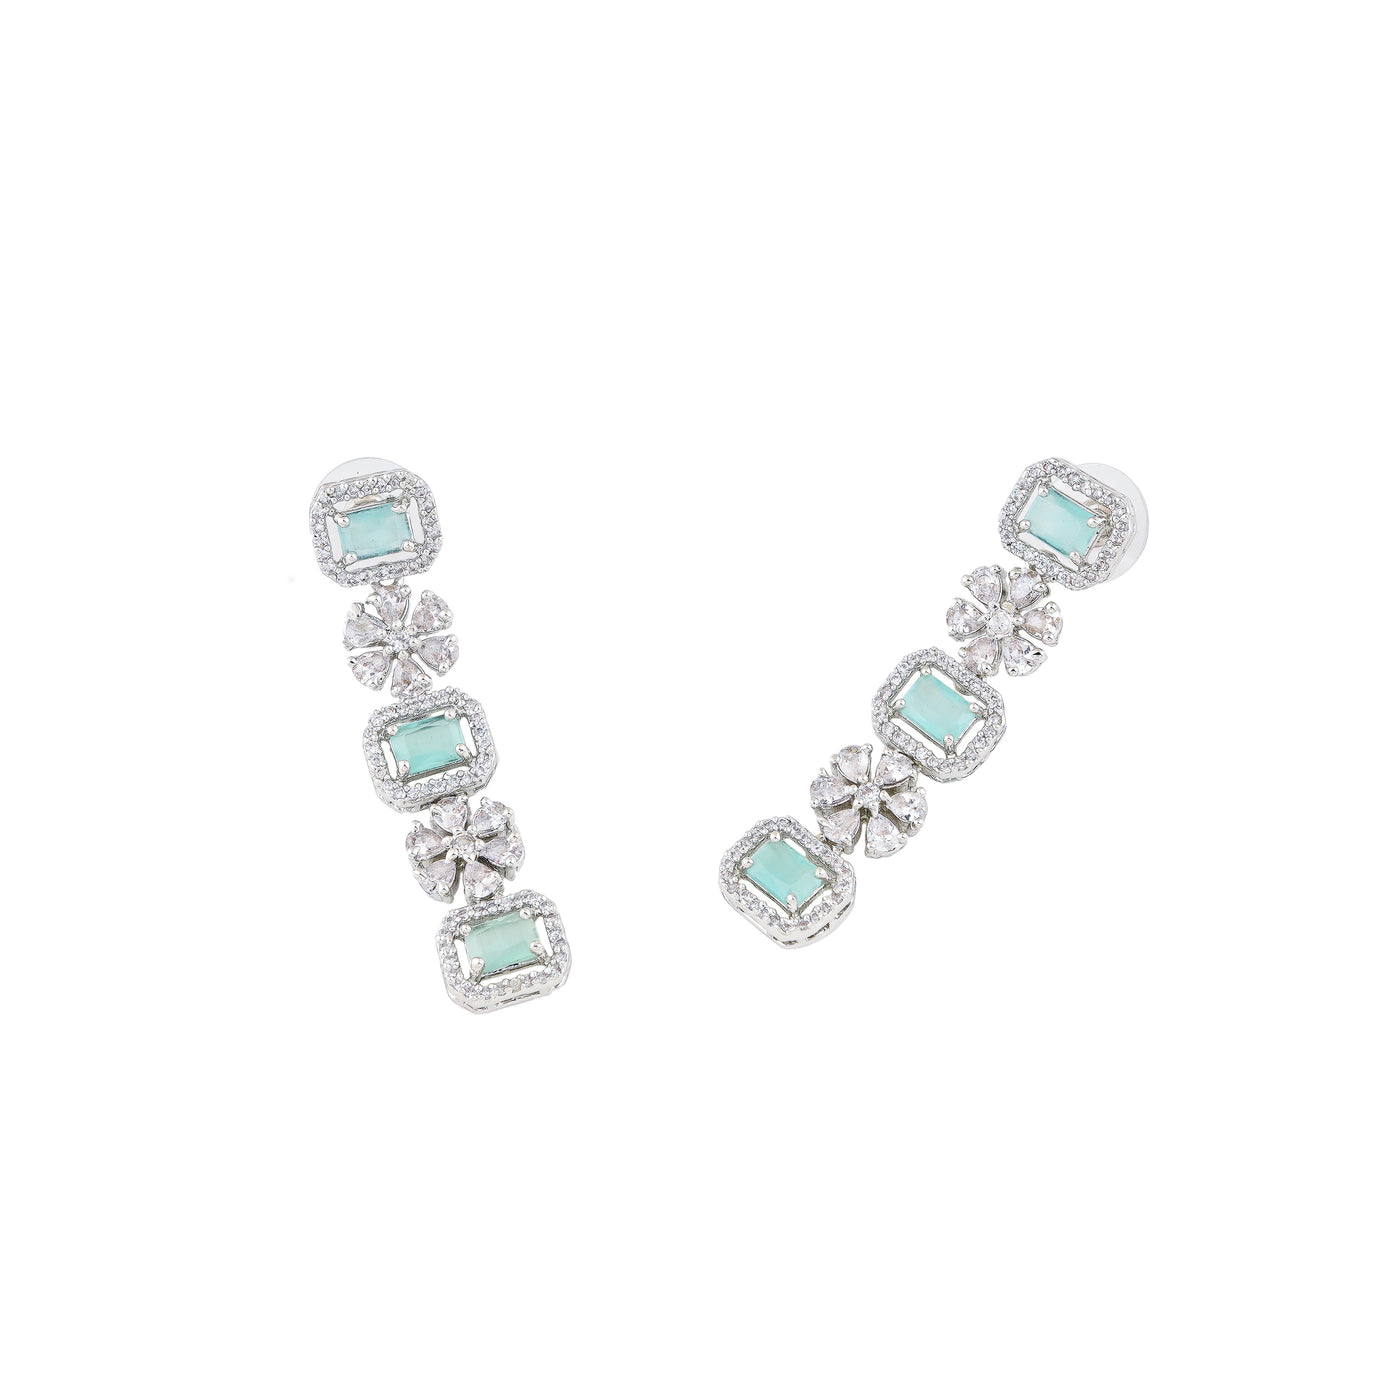 Estele Rhodium Plated CZ Magnificent Three Layered Necklace Set with Mint Green and White Crystals for Women